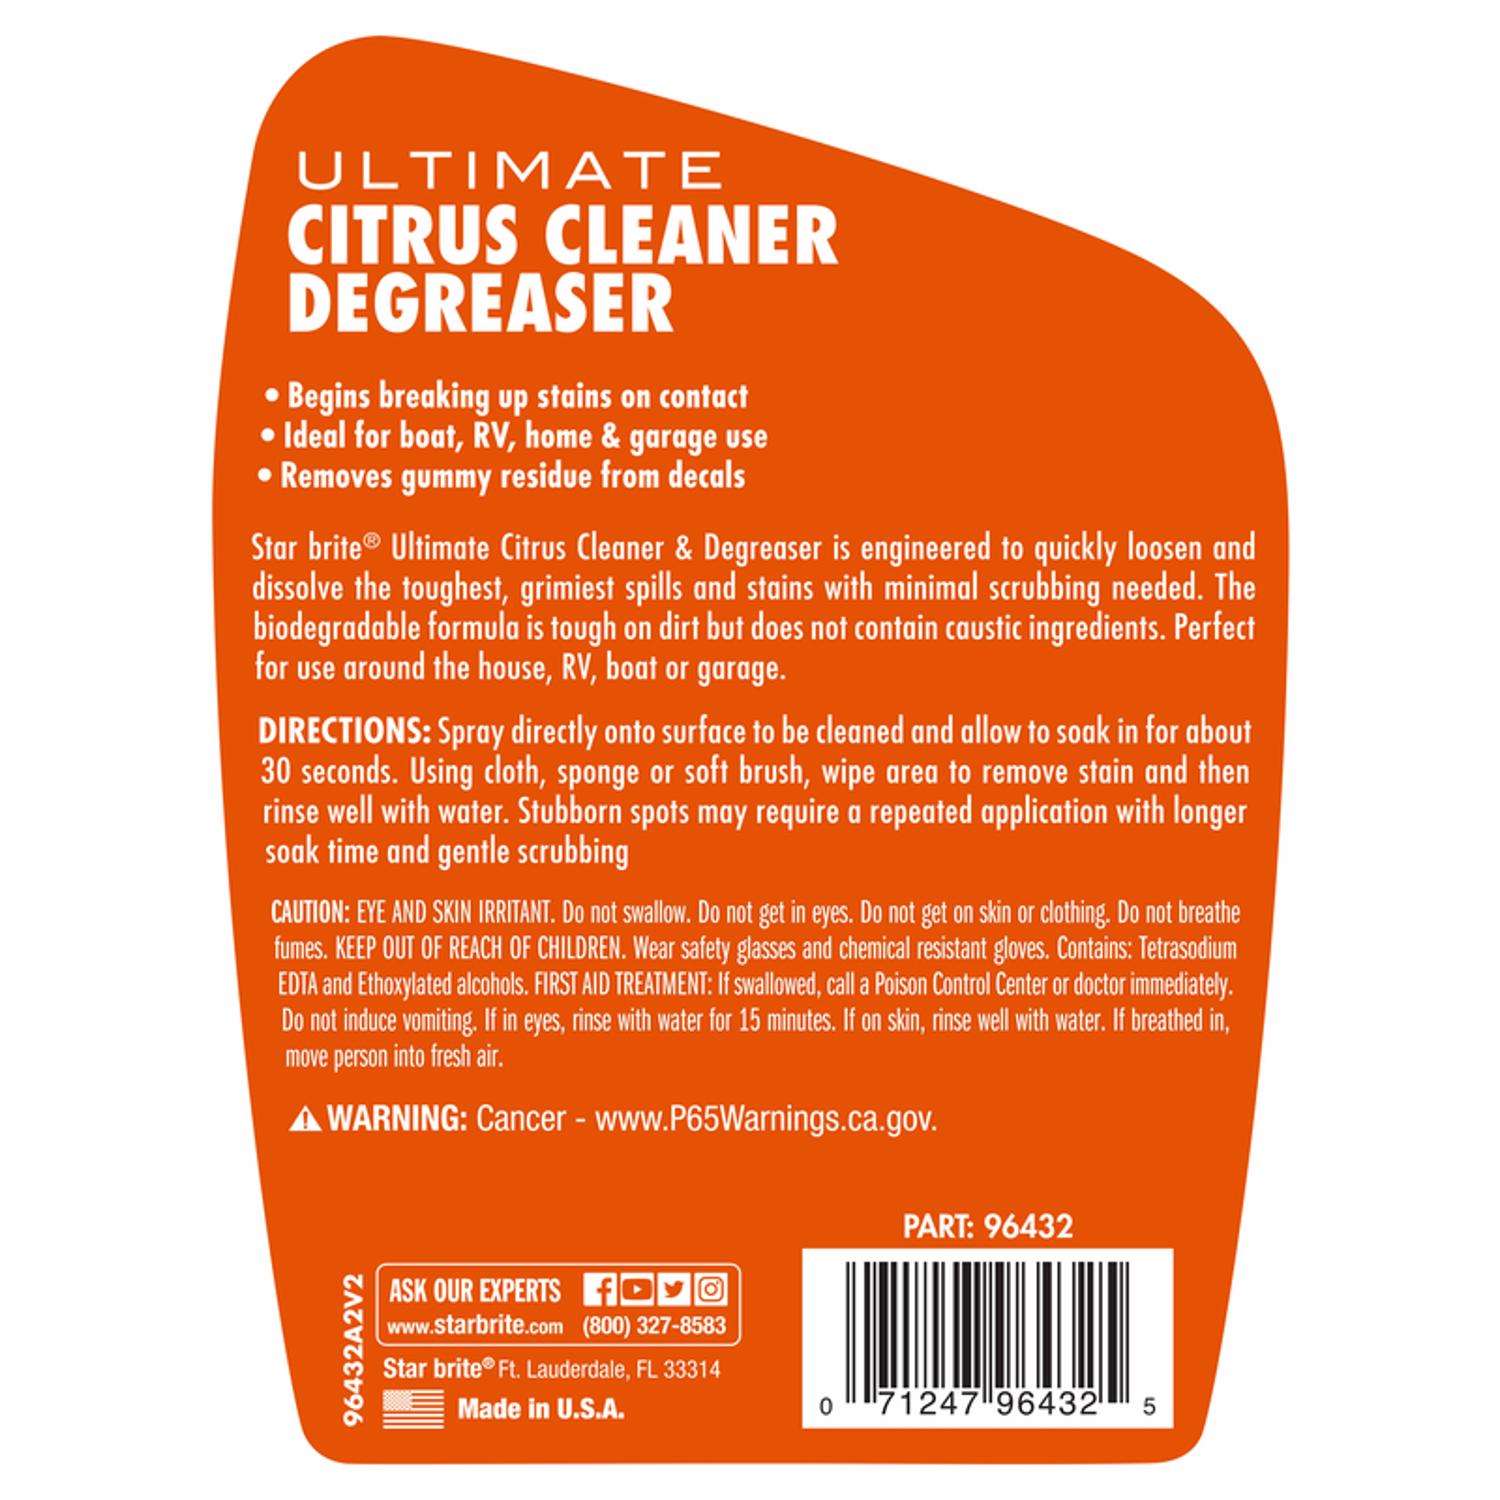 STAR BRITE Ultimate Citrus Cleaner and Degreaser